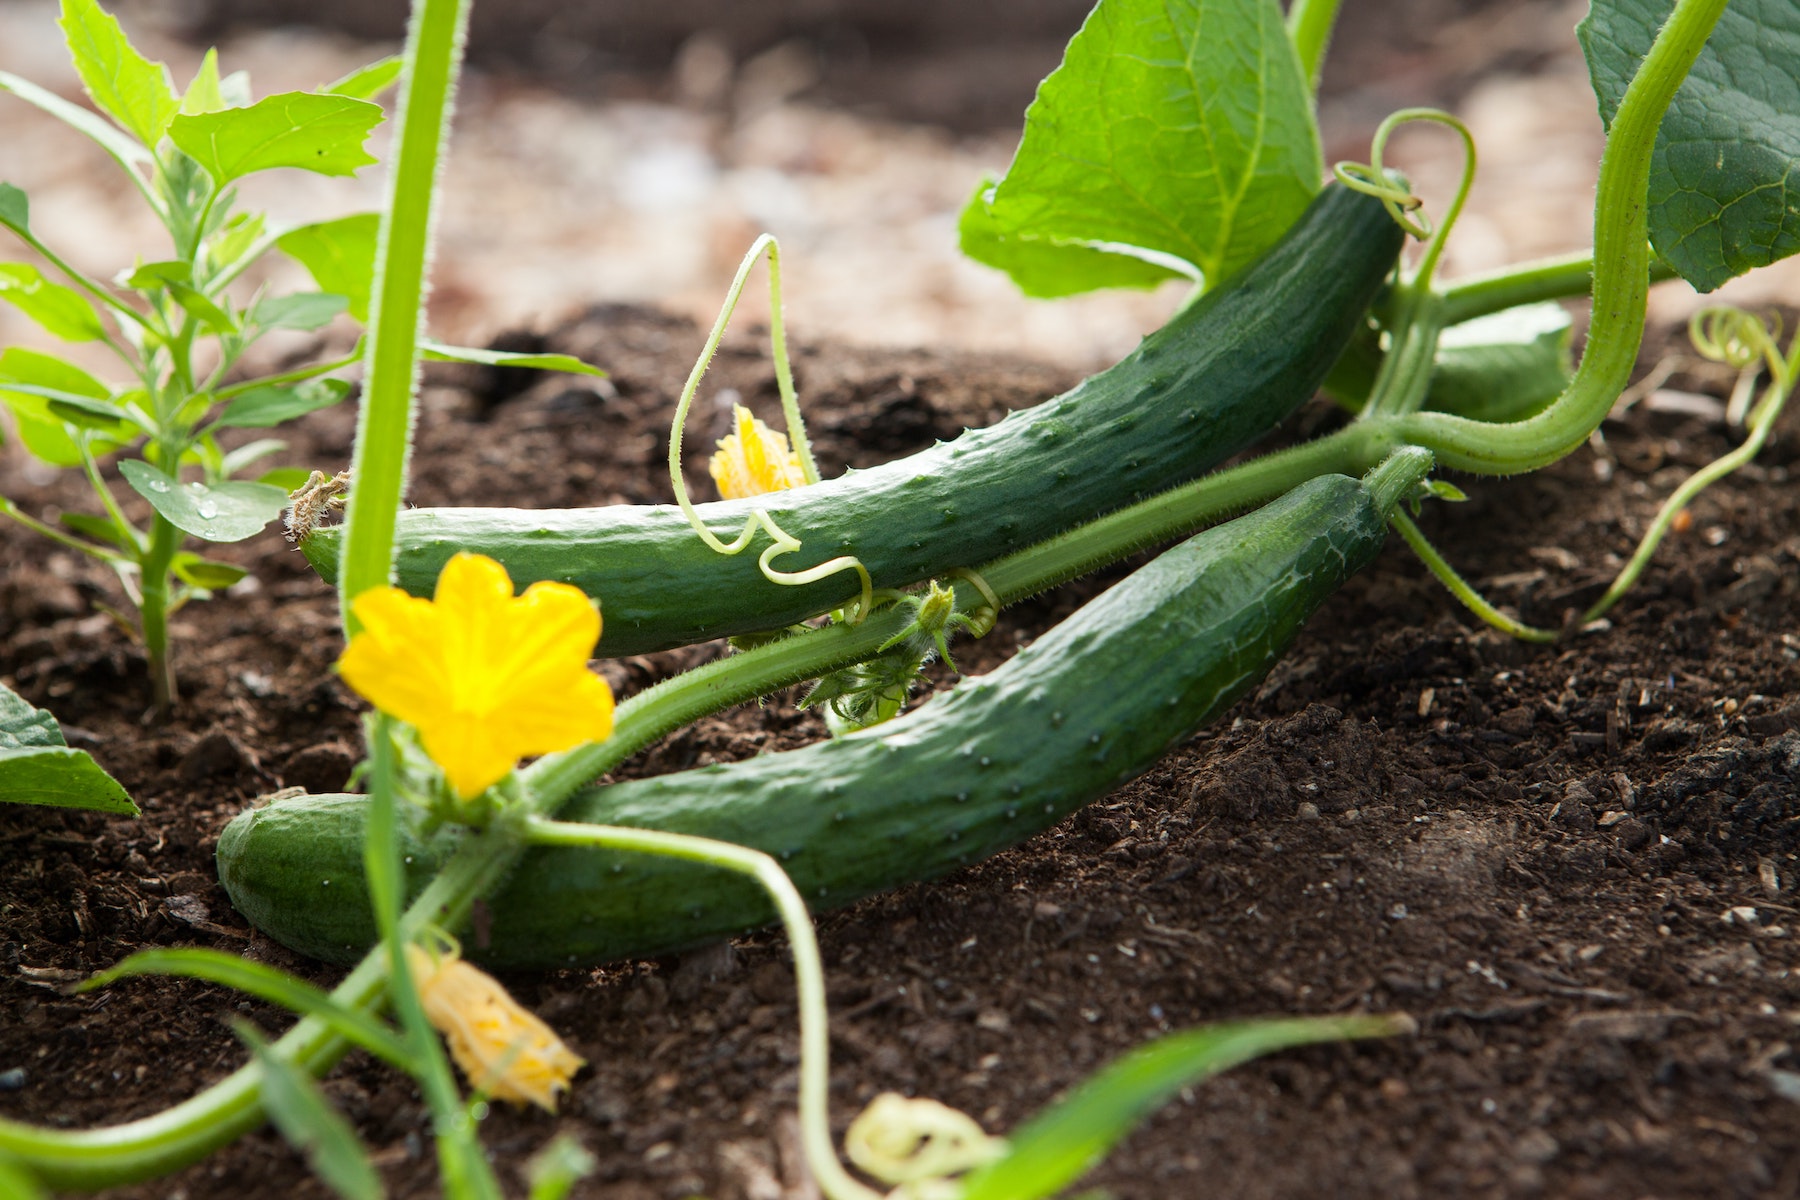 How to grow cucumber